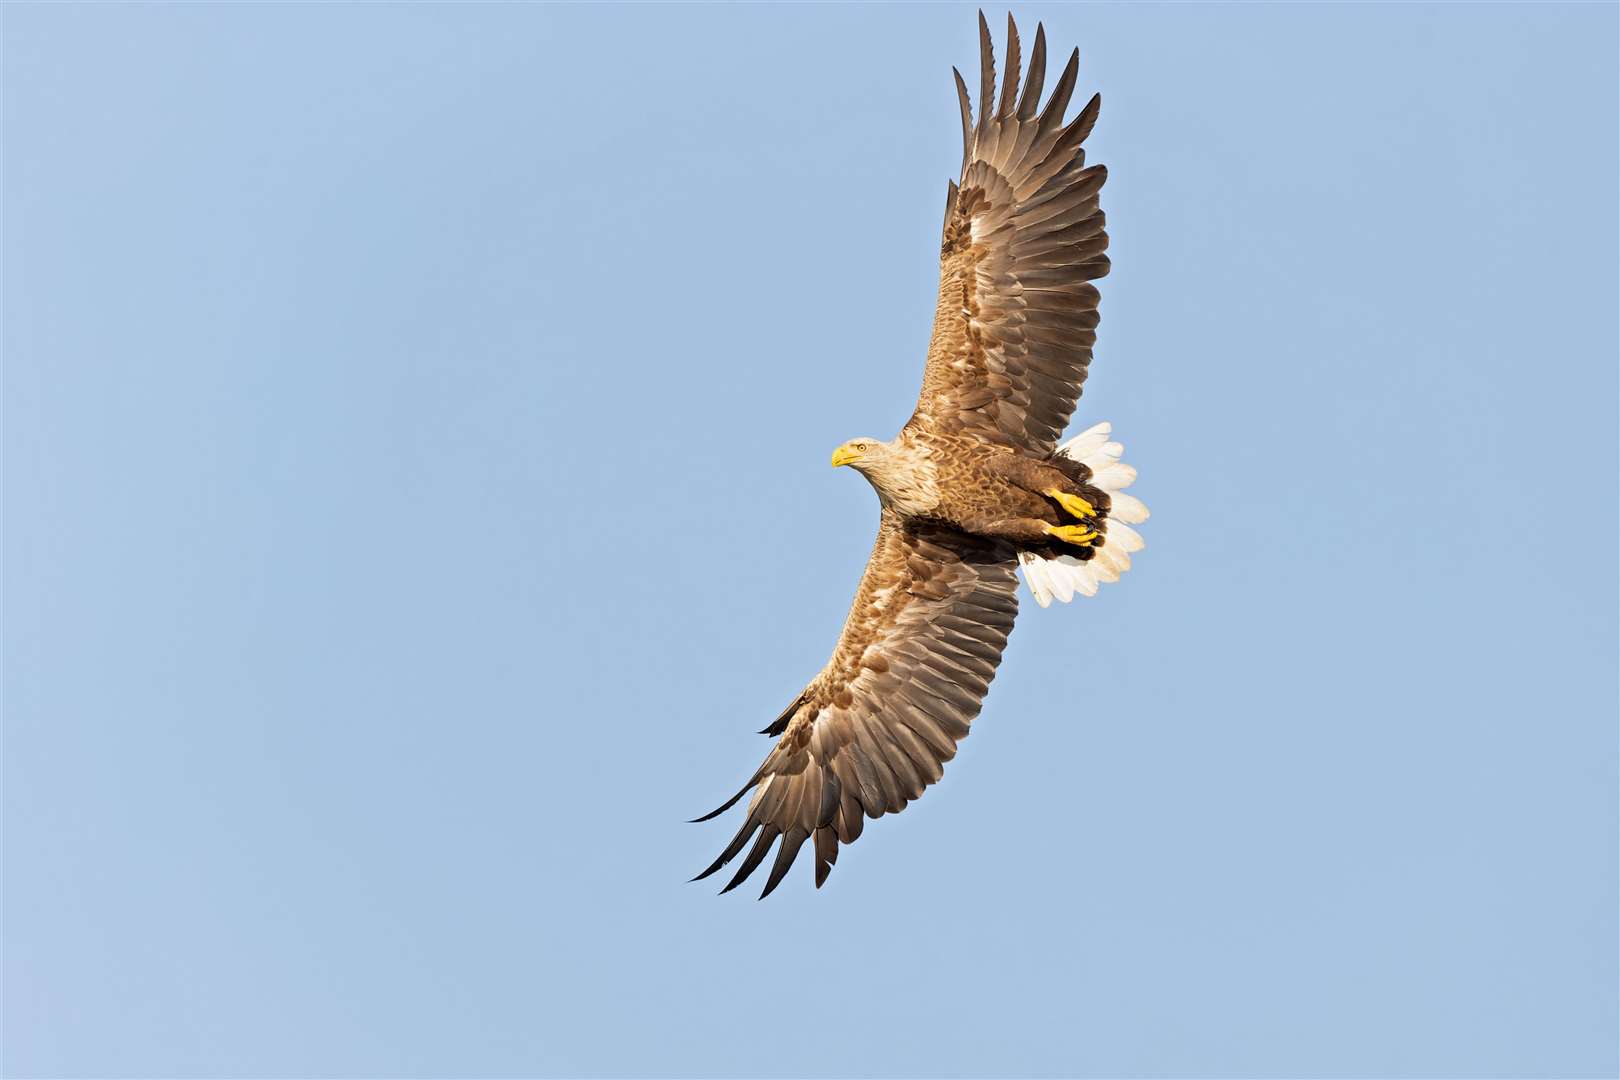 An adult white-tailed eagle in flight (stock image).